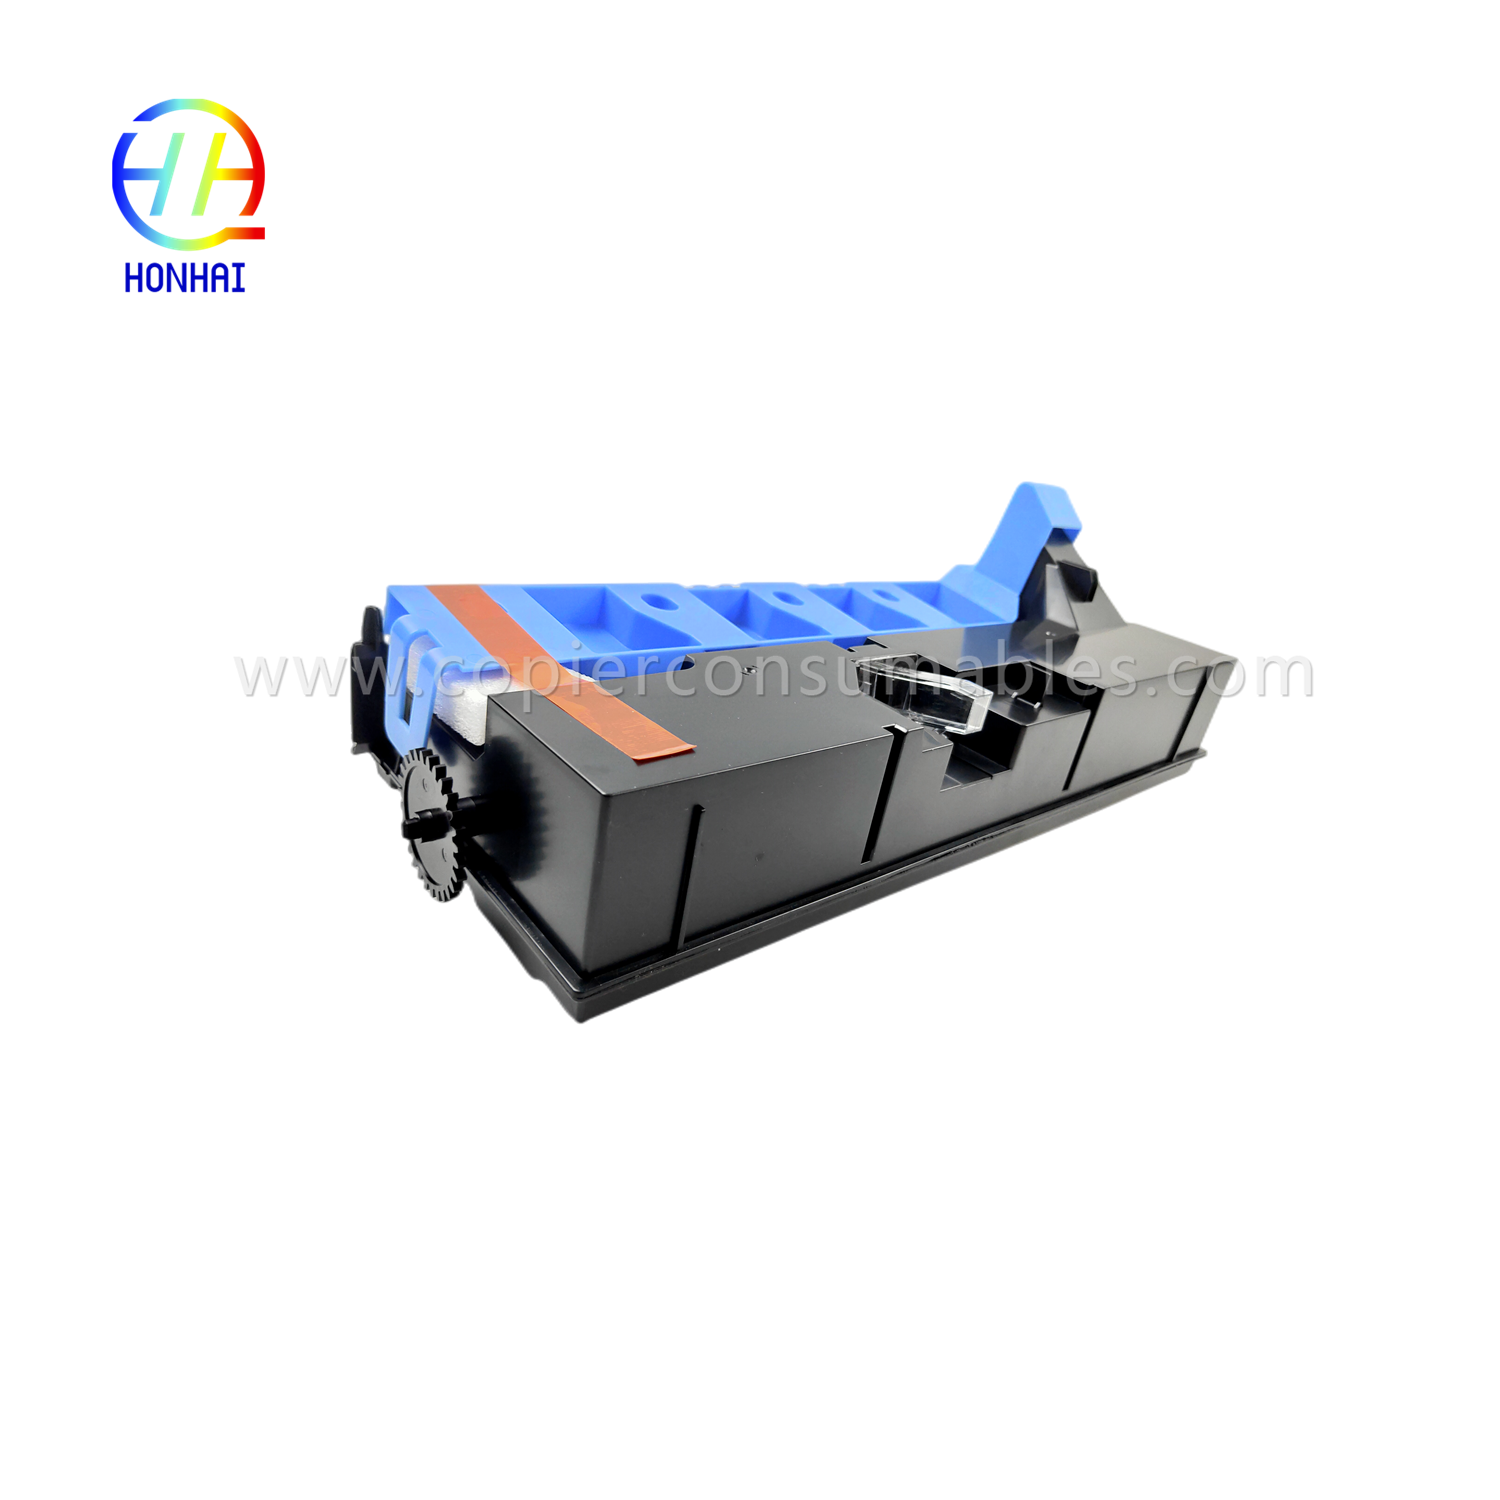 https://c585.goodao.net/waste-toner-container-for-konica-minolta-bizhub-c226-c256-c266-c227-c287-c367-c7333-c7226-c7528-wx-105-a8jjwy1-a8jjwy1-a8jjwy- toner-box-product/